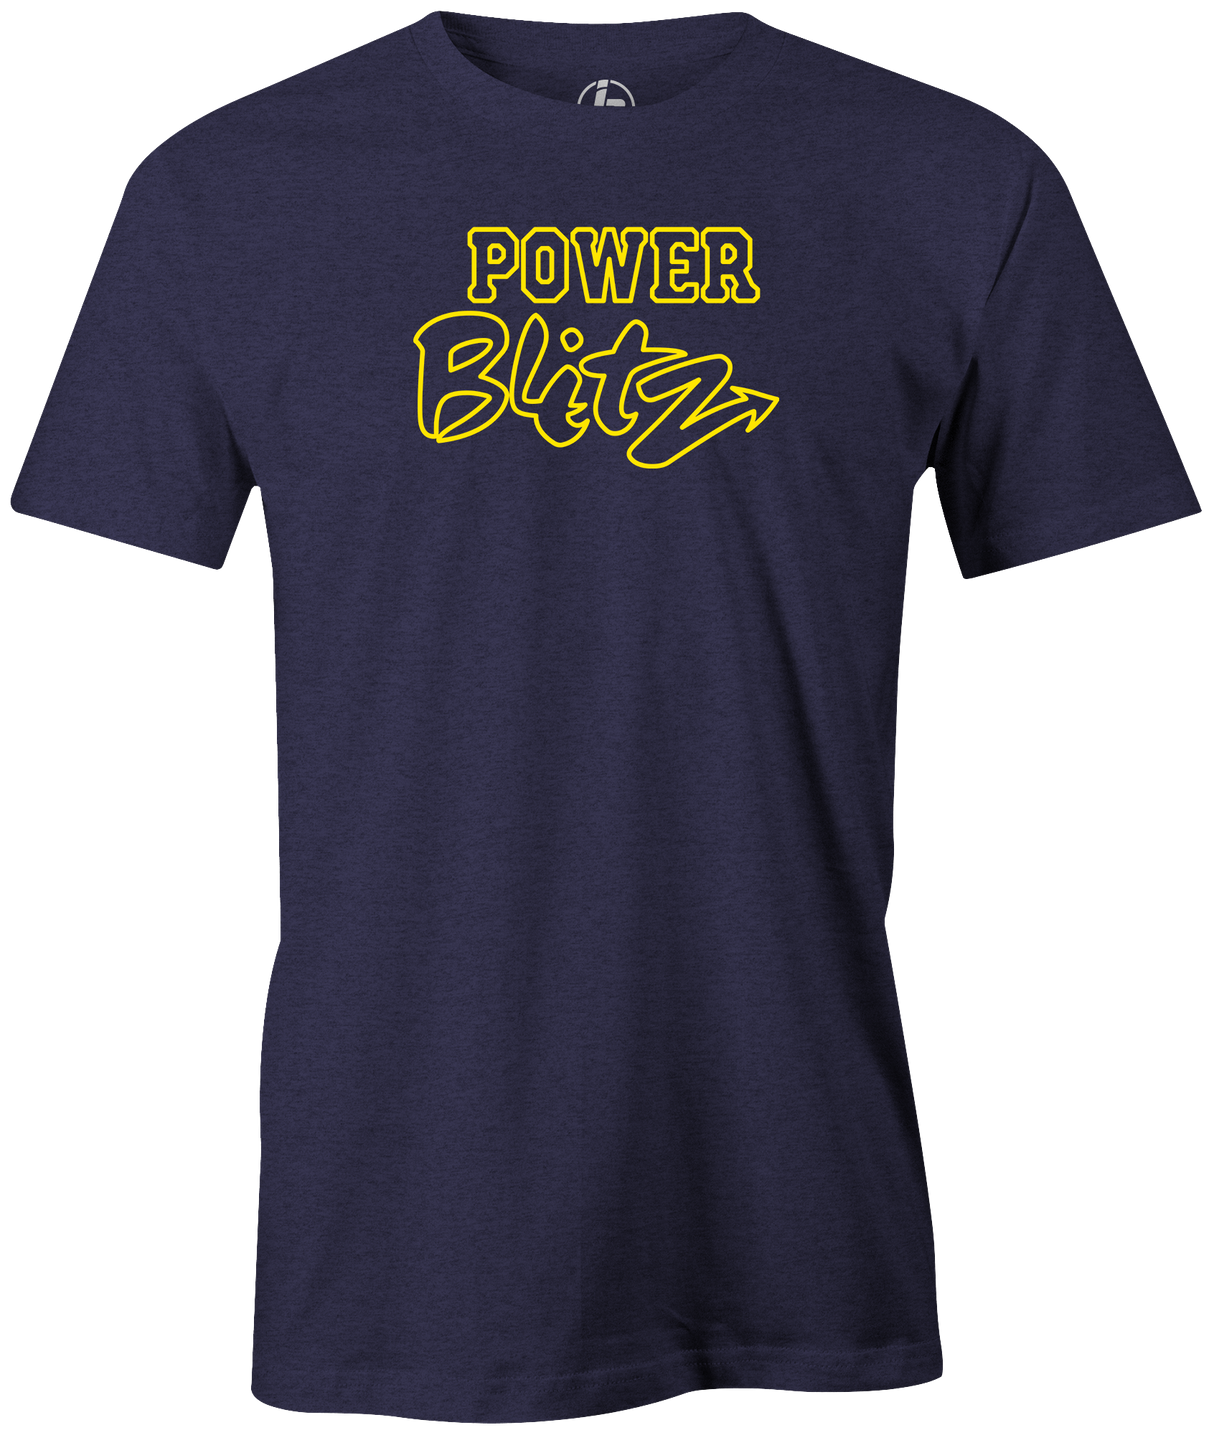 Over the years the Brunswick brand has delivered so much to bowlers all over the world. Their experience has led to many amazing products. Pick up the Brunswick Bowling Power Blitz Tee today. Retro Brunswick bowling league shirts on sale discounted gifts for bowlers. Bowling party apparel. Original bowling tees. throwback